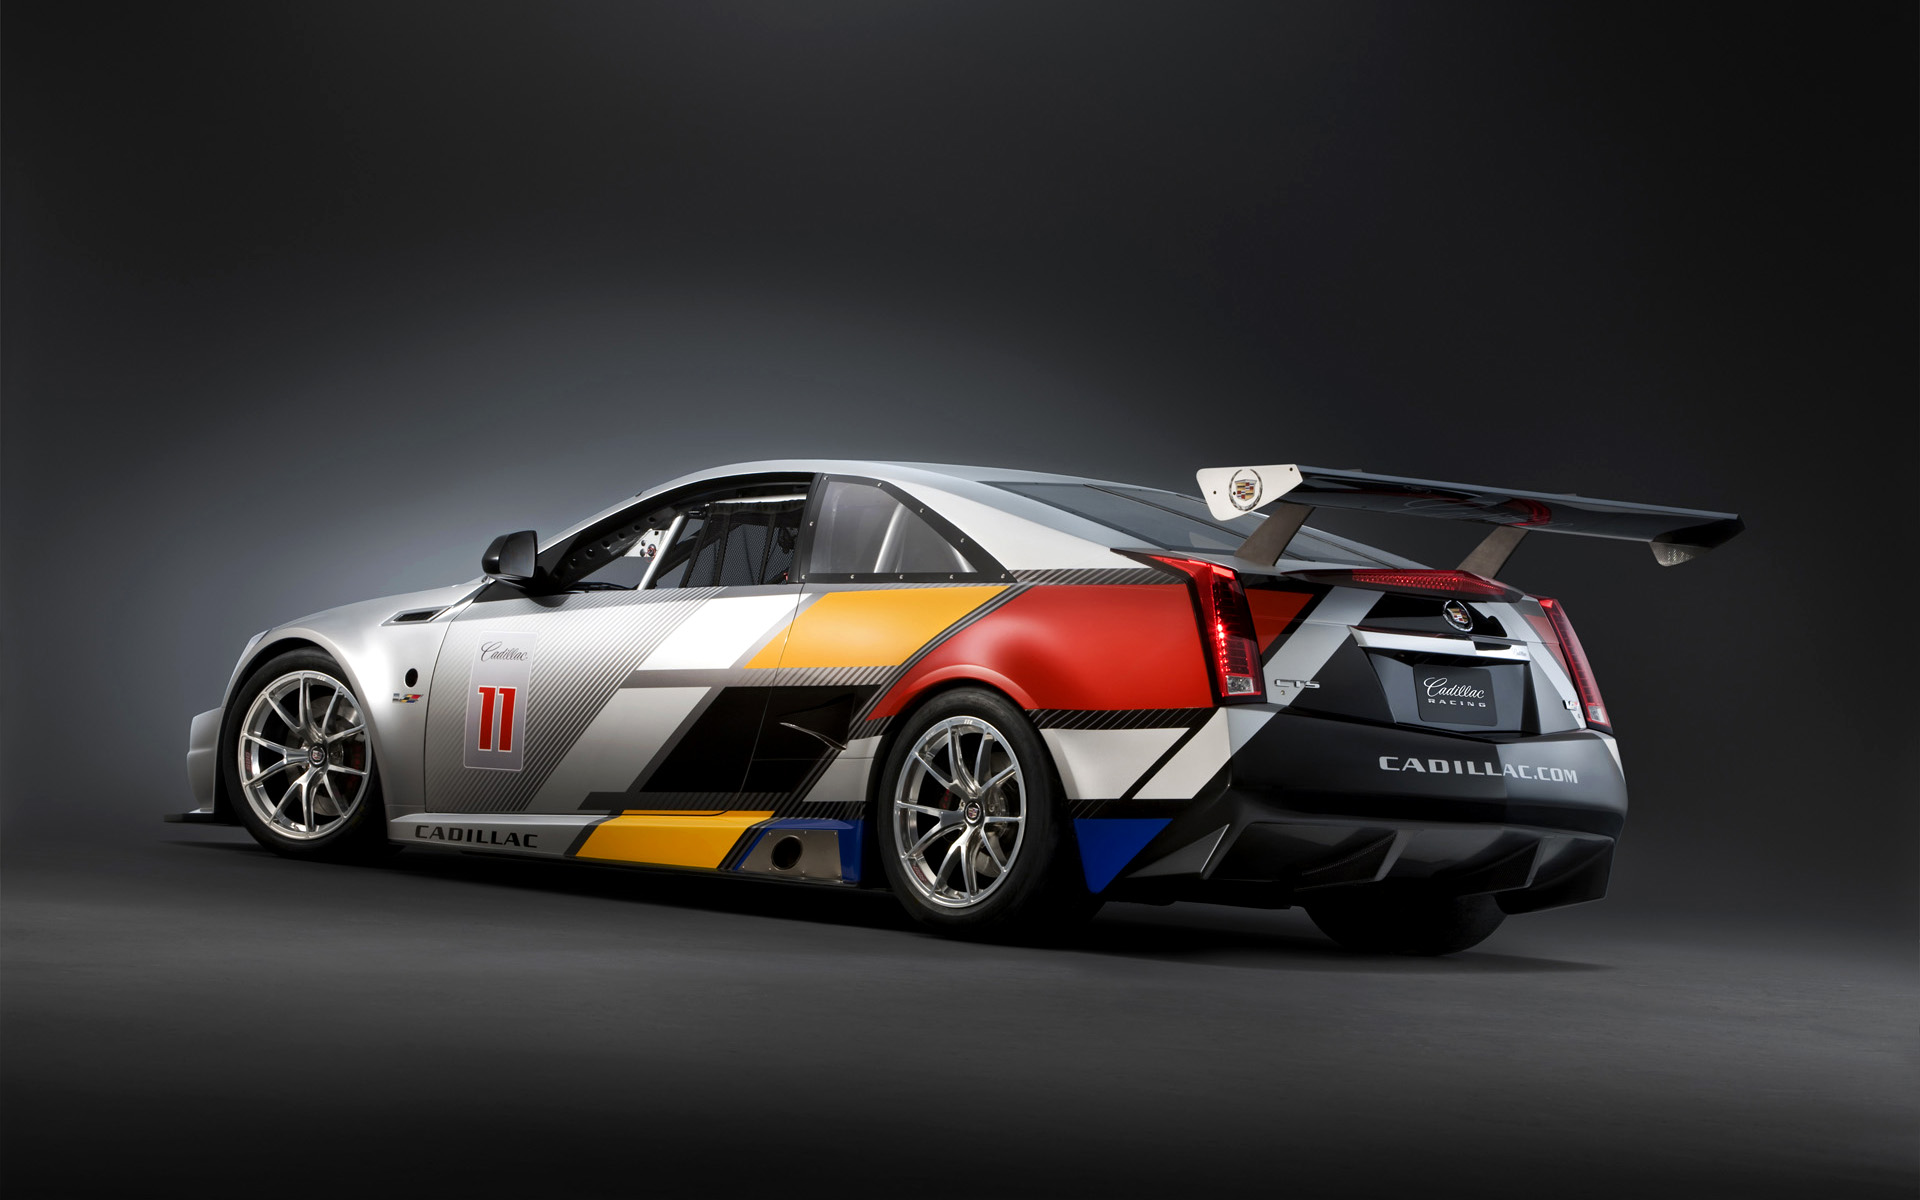 2011, Cadillac, Cts v, Coupe, Racecar, Race, Cars Wallpaper